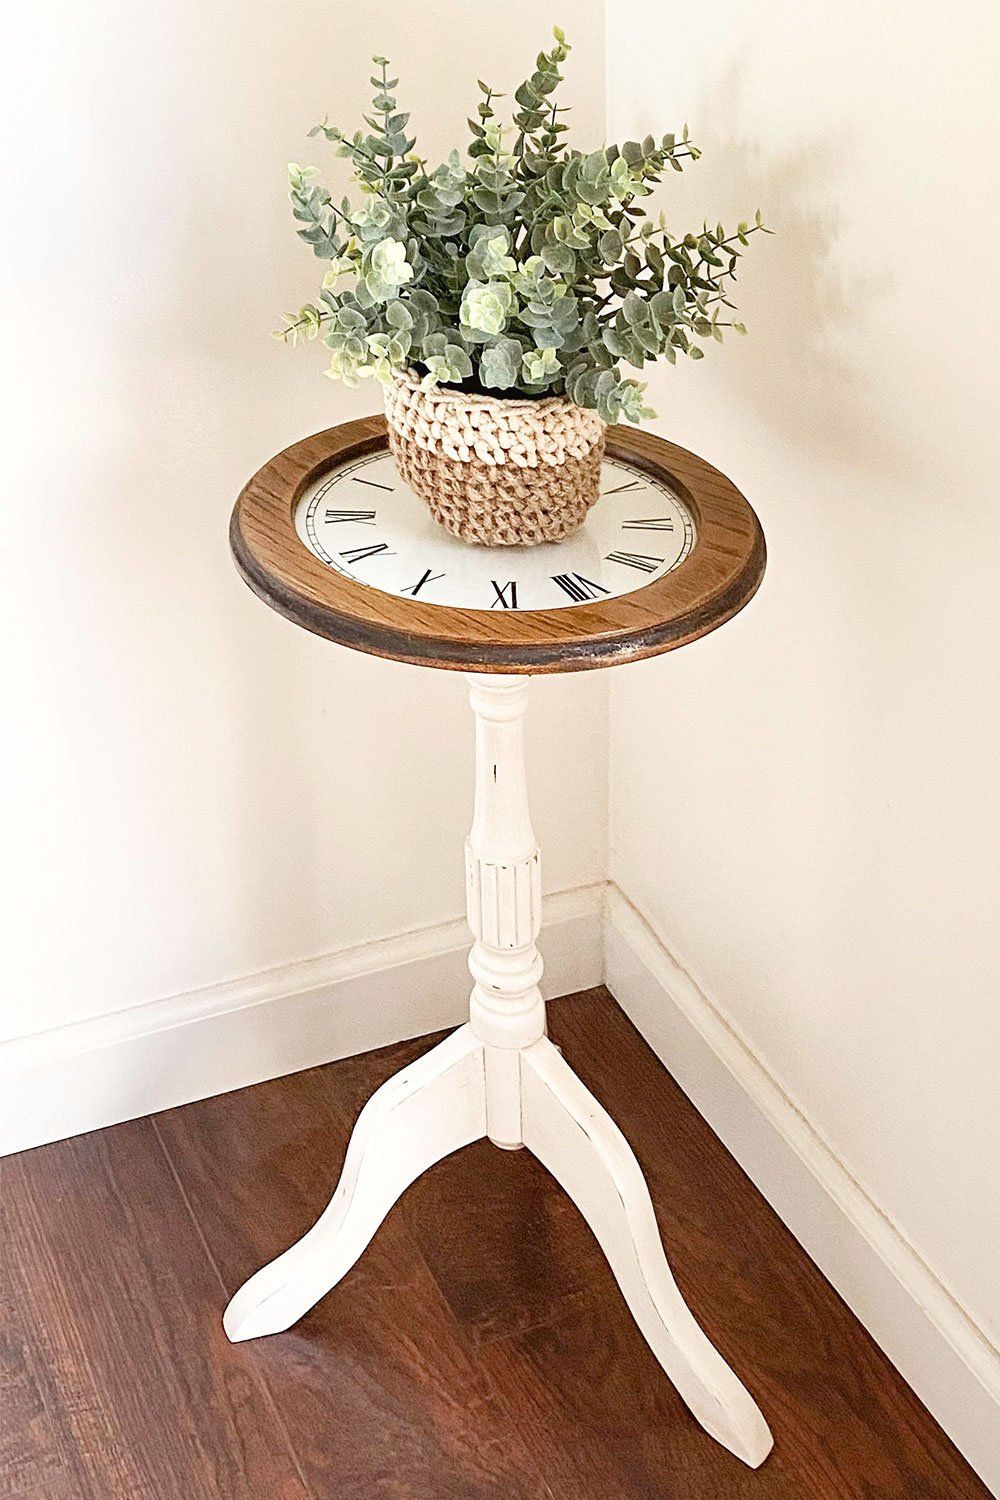 Refinished Wood Plant Stand With A Diy Vinyl Clock Tabletop – Pertaining To Painted Wood Plant Stands (View 2 of 15)